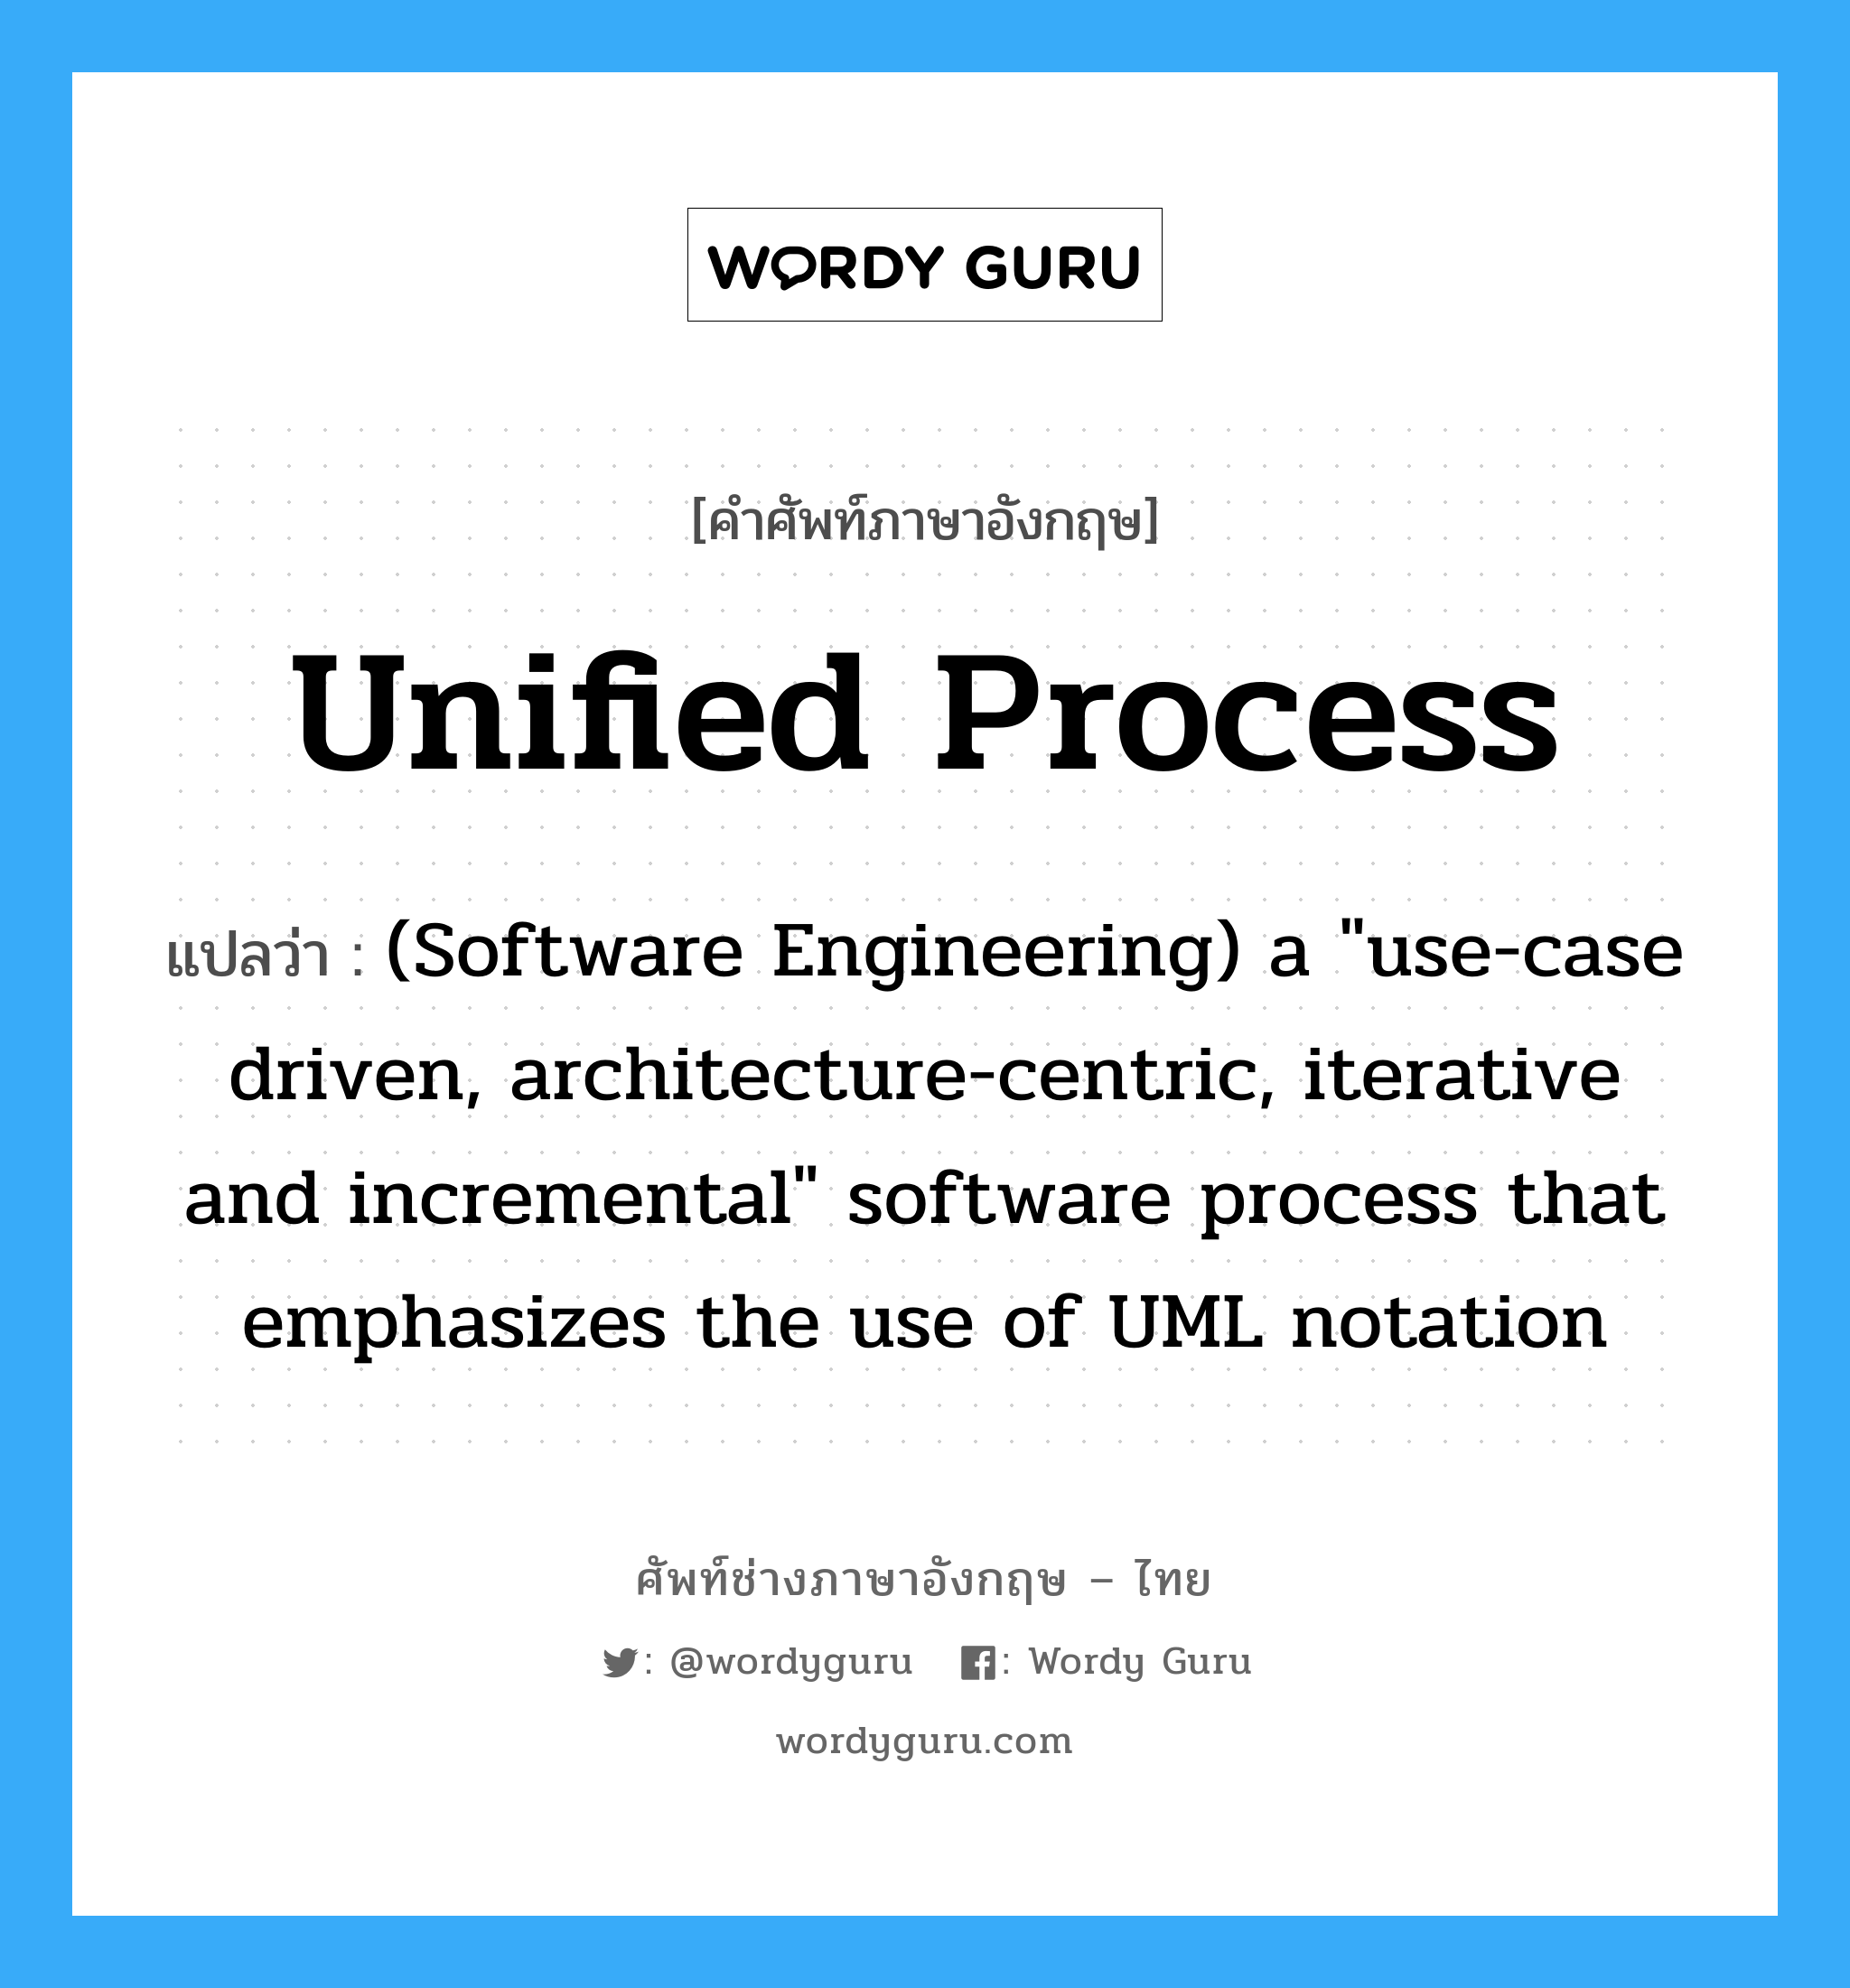 Unified process แปลว่า?, คำศัพท์ช่างภาษาอังกฤษ - ไทย Unified process คำศัพท์ภาษาอังกฤษ Unified process แปลว่า (Software Engineering) a "use-case driven, architecture-centric, iterative and incremental" software process that emphasizes the use of UML notation